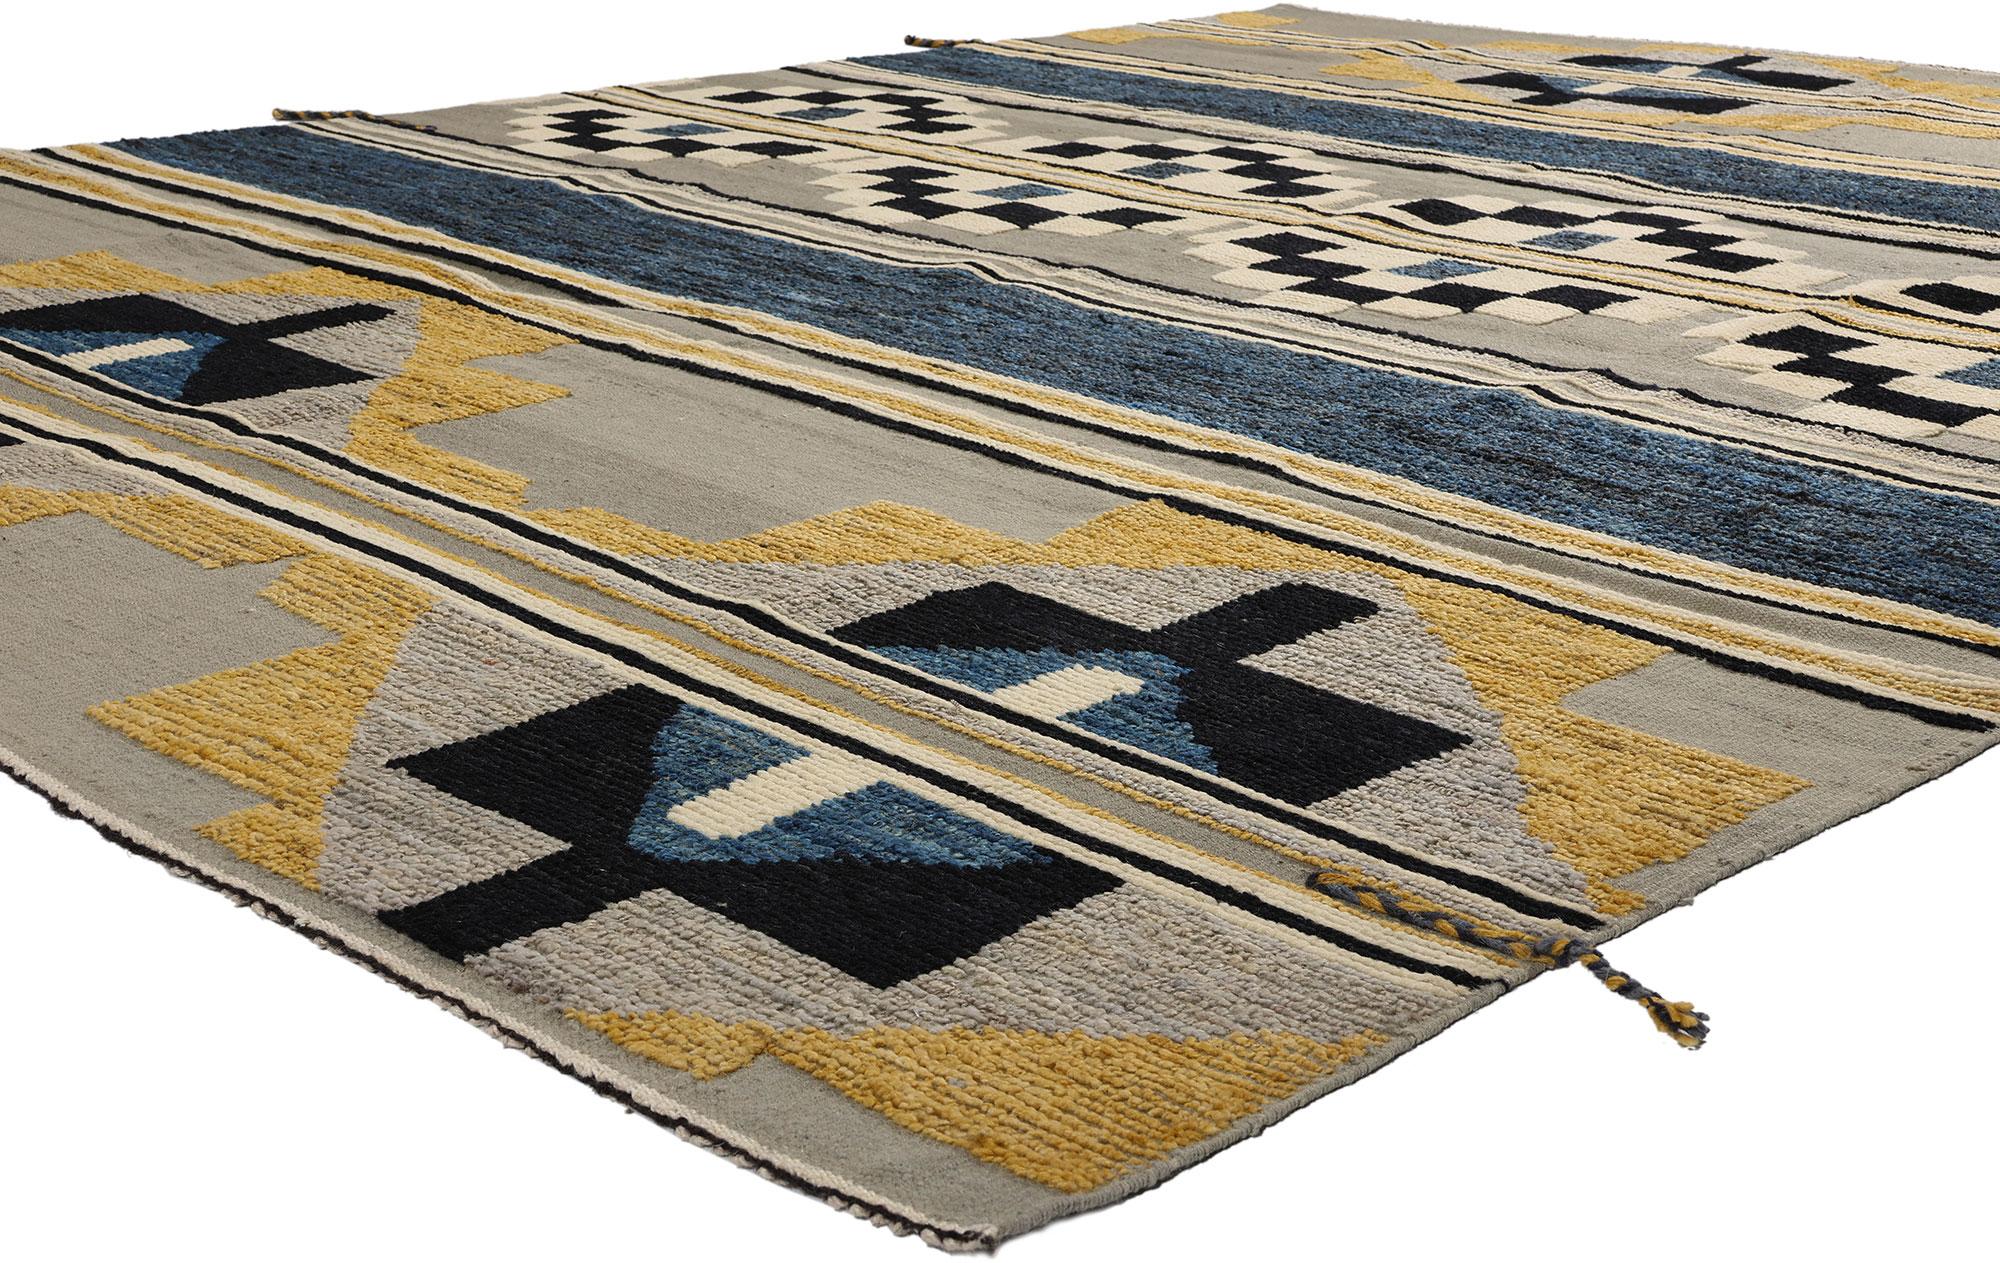 81056 Southwest Modern Moroccan High-Low Rug, 08'02 x 10'06. Modern Southwest meets Contemporary Santa Fe in this hand knotted wool Moroccan High-Low rug, creating a fusion of cultural influences with Navajo design aesthetics that result in a unique